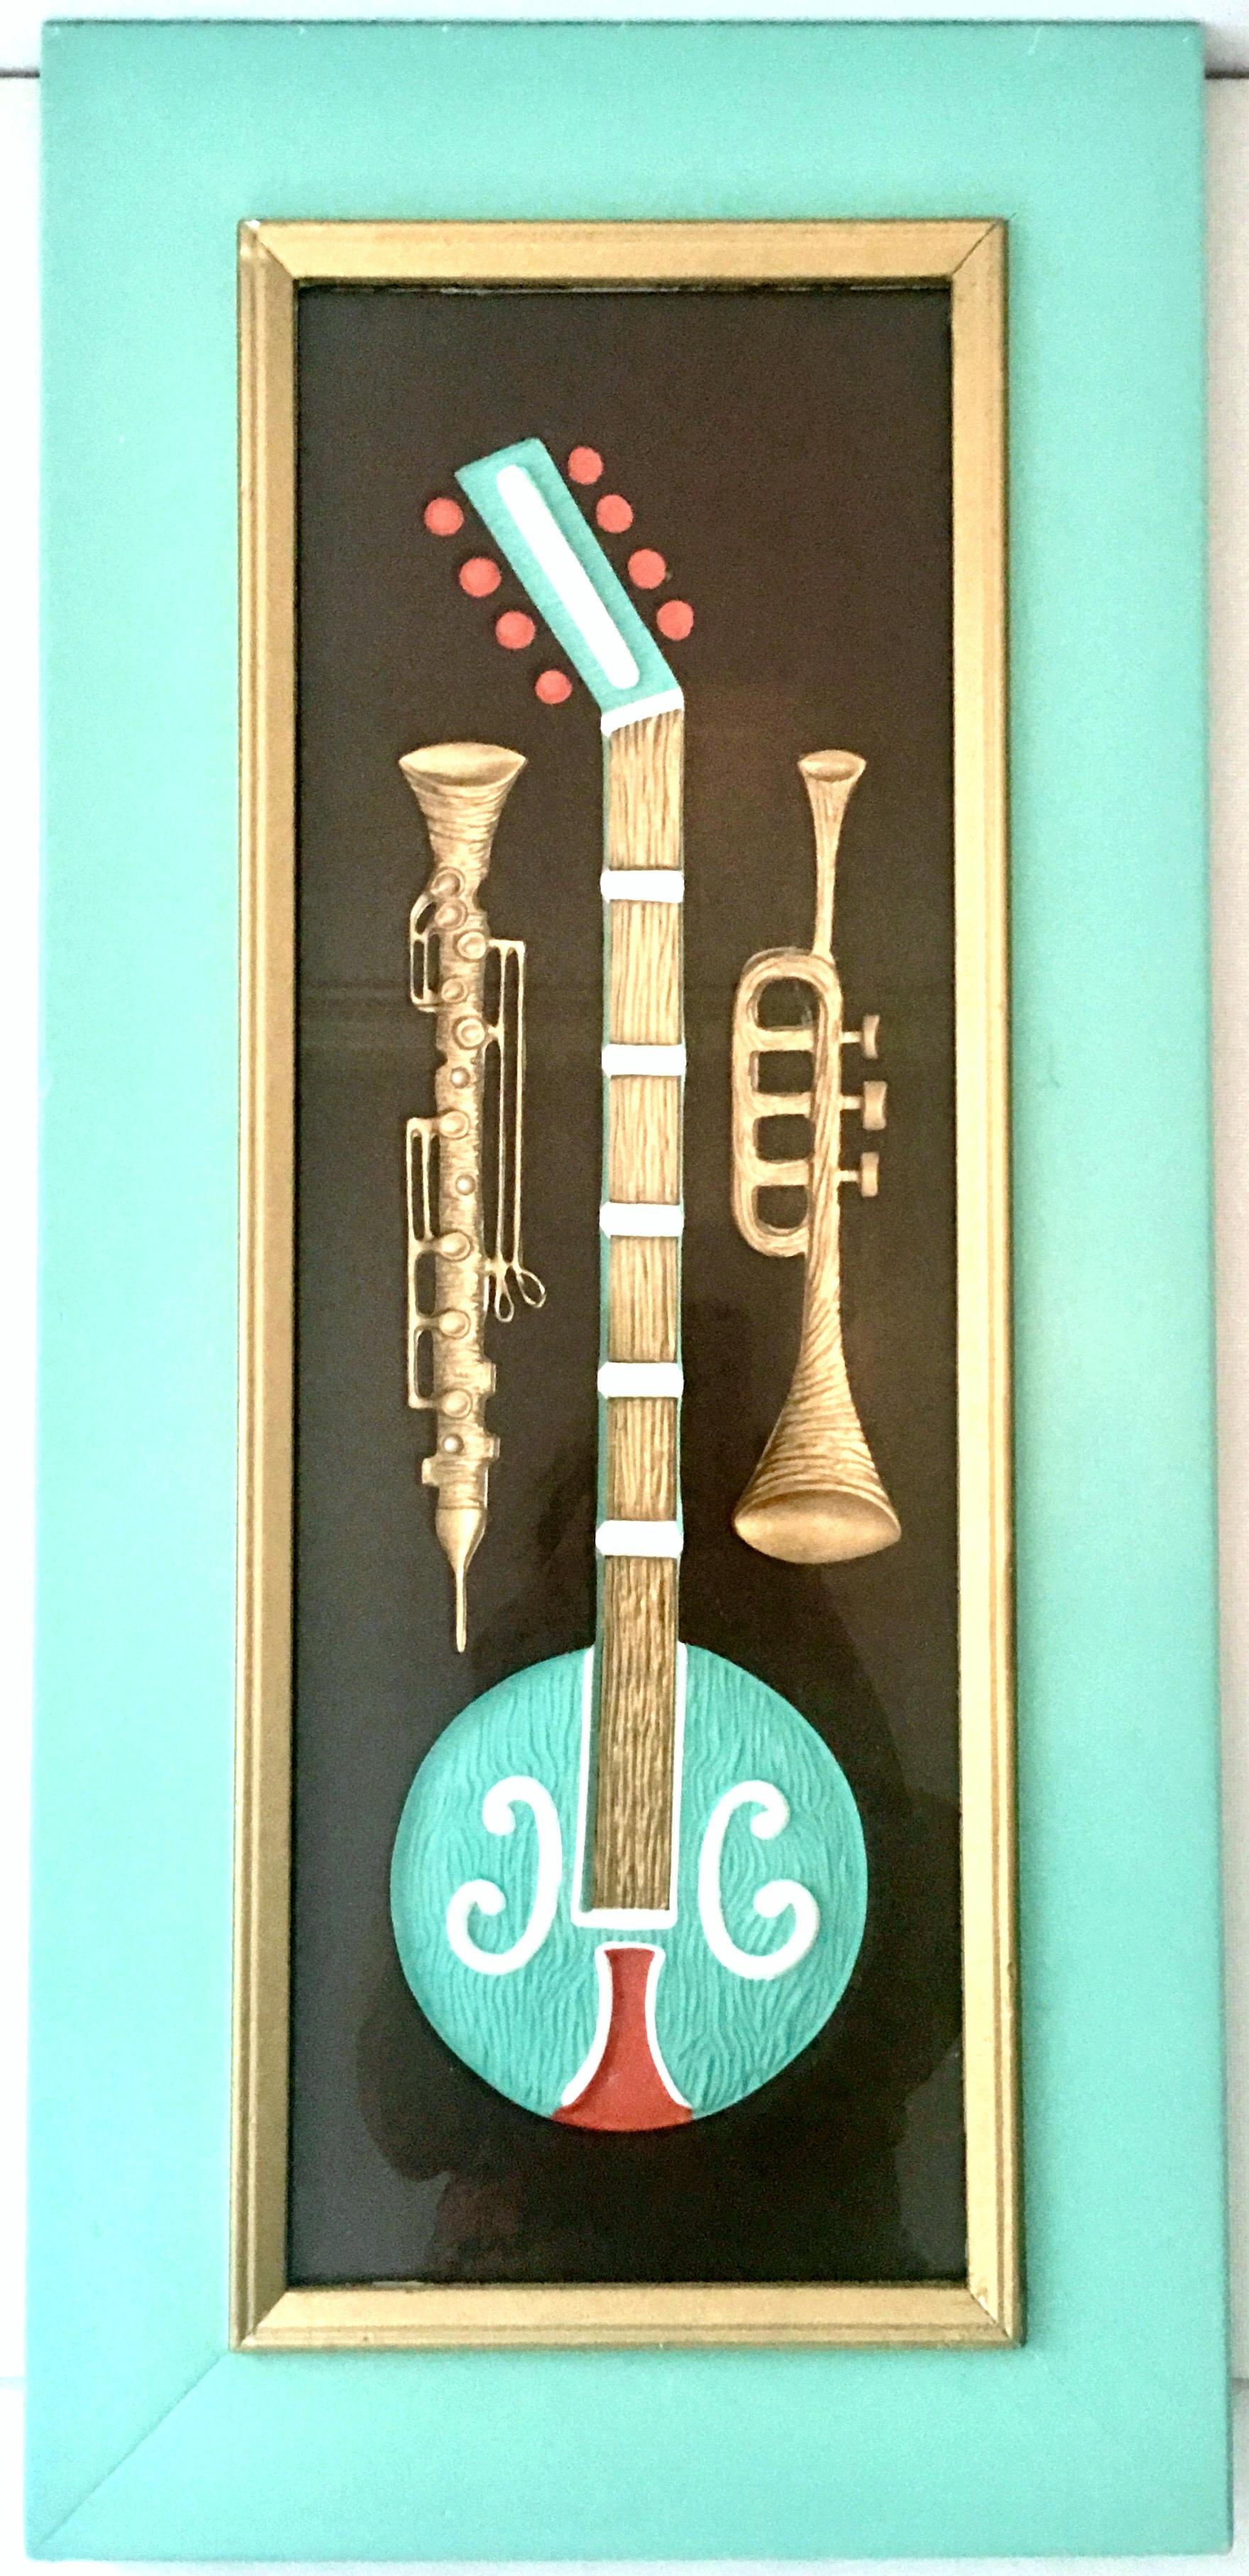 Mid-20th century coveted pair of original handcrafted dimensional musical instrument shadow box painted panel's by, Turner. This rare and coveted complimentary pair of handcrafted dimensional retro musical instruments are recessed, raised and